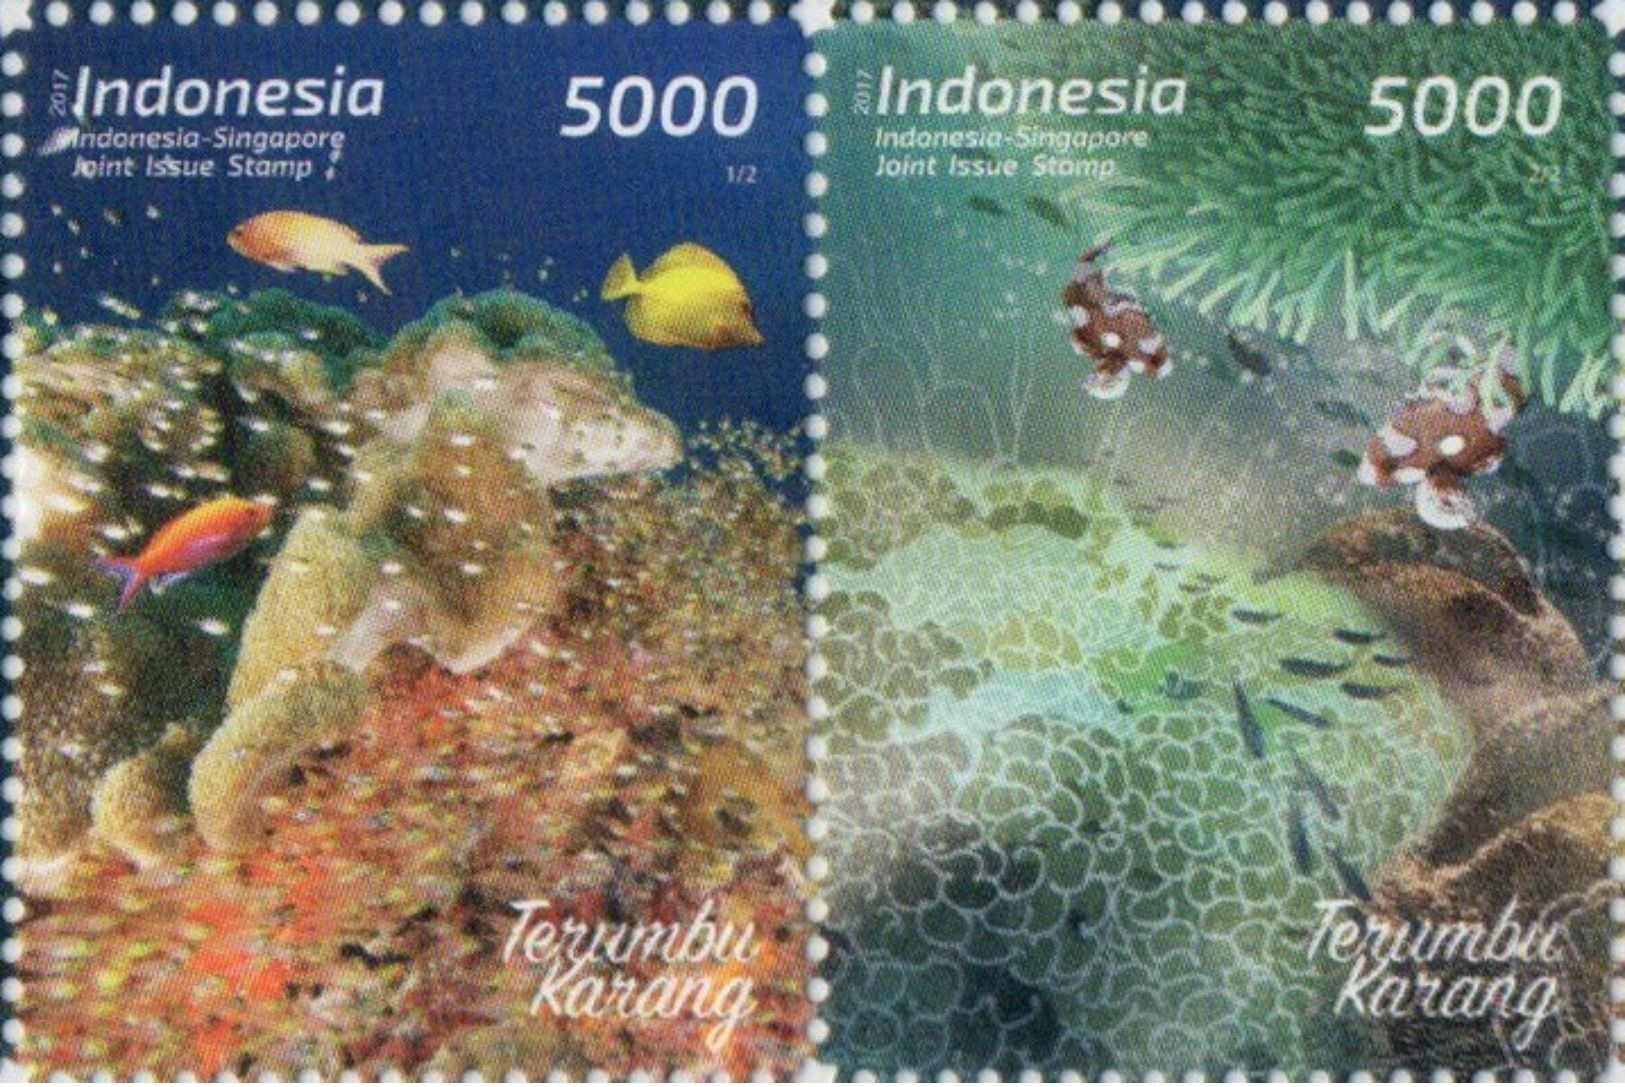 INDONESIA 2017-10 JOINT ISSUE W/ SINGAPORE MARINE LIFE CORAL SET STAMPS MNH - Indonesia